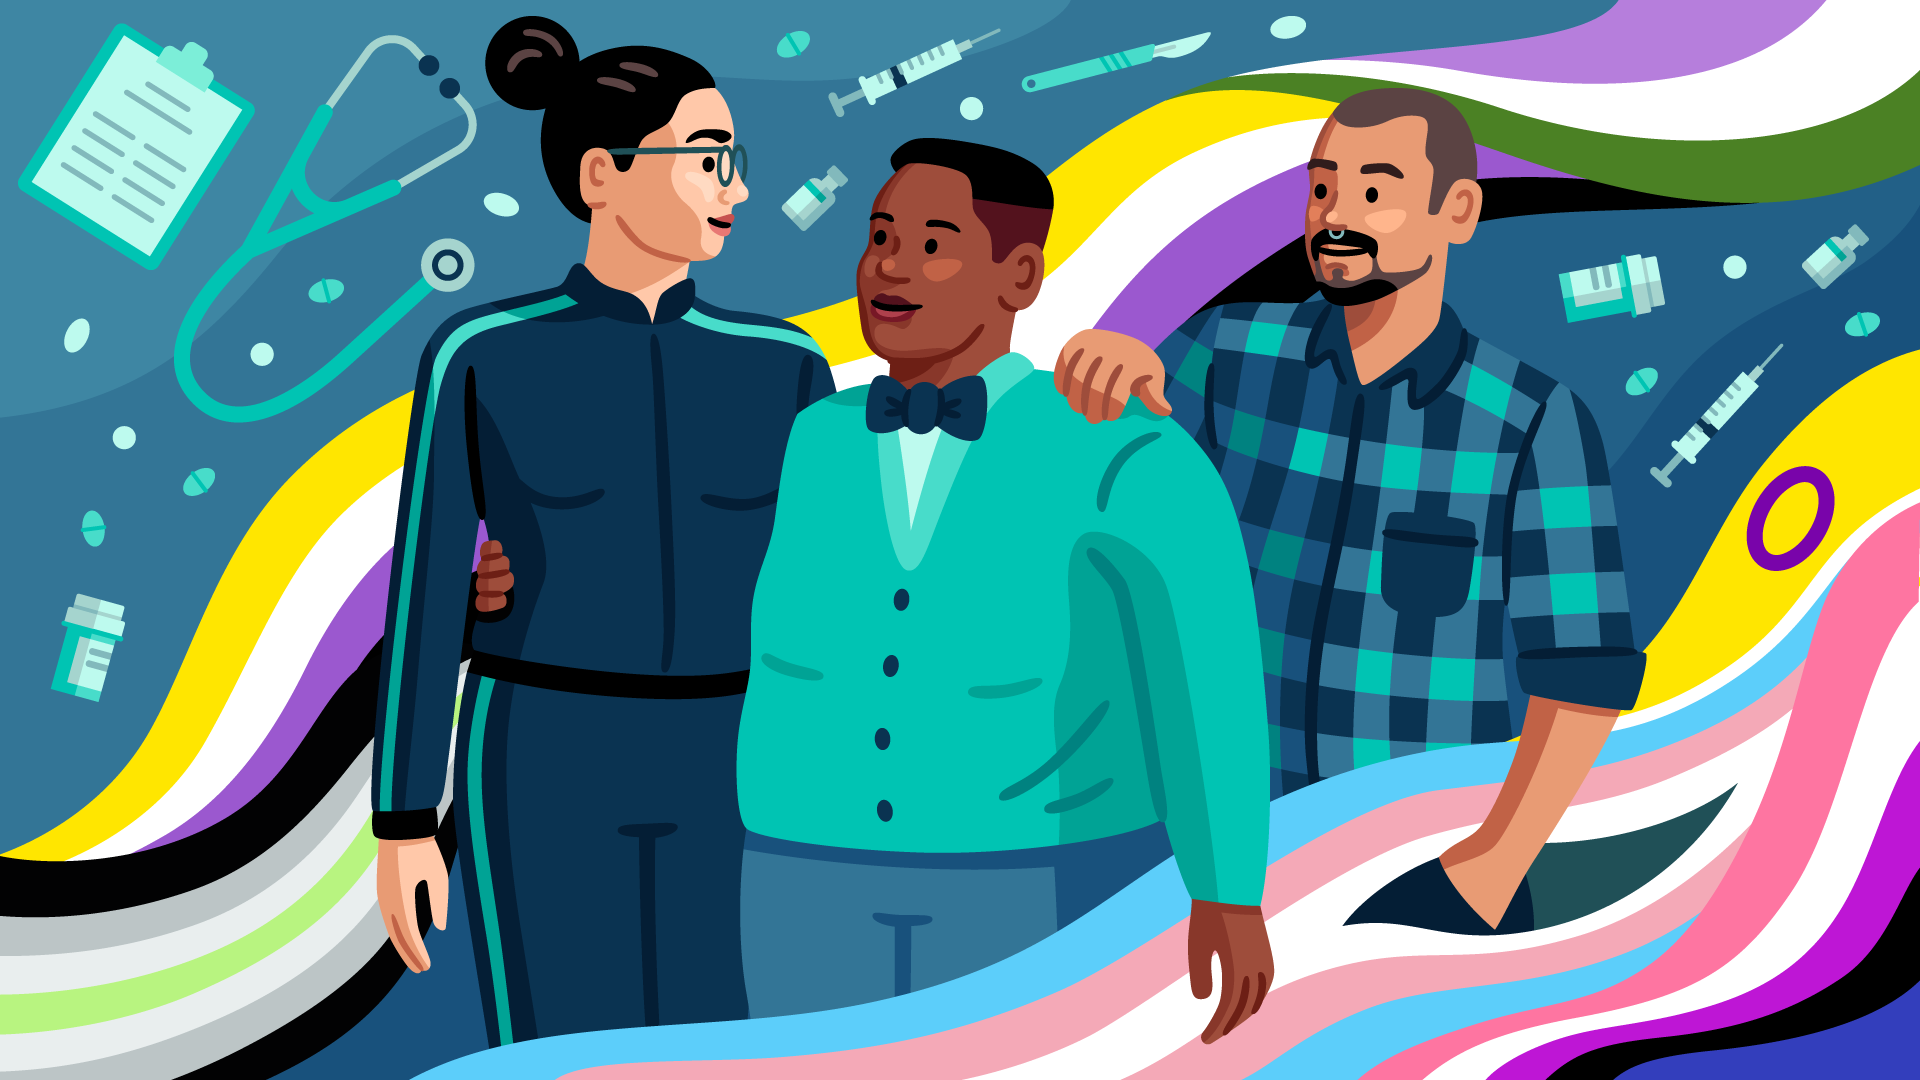 An illustration with nonbinary and trans flags, and people who identify as LGBTQ+.